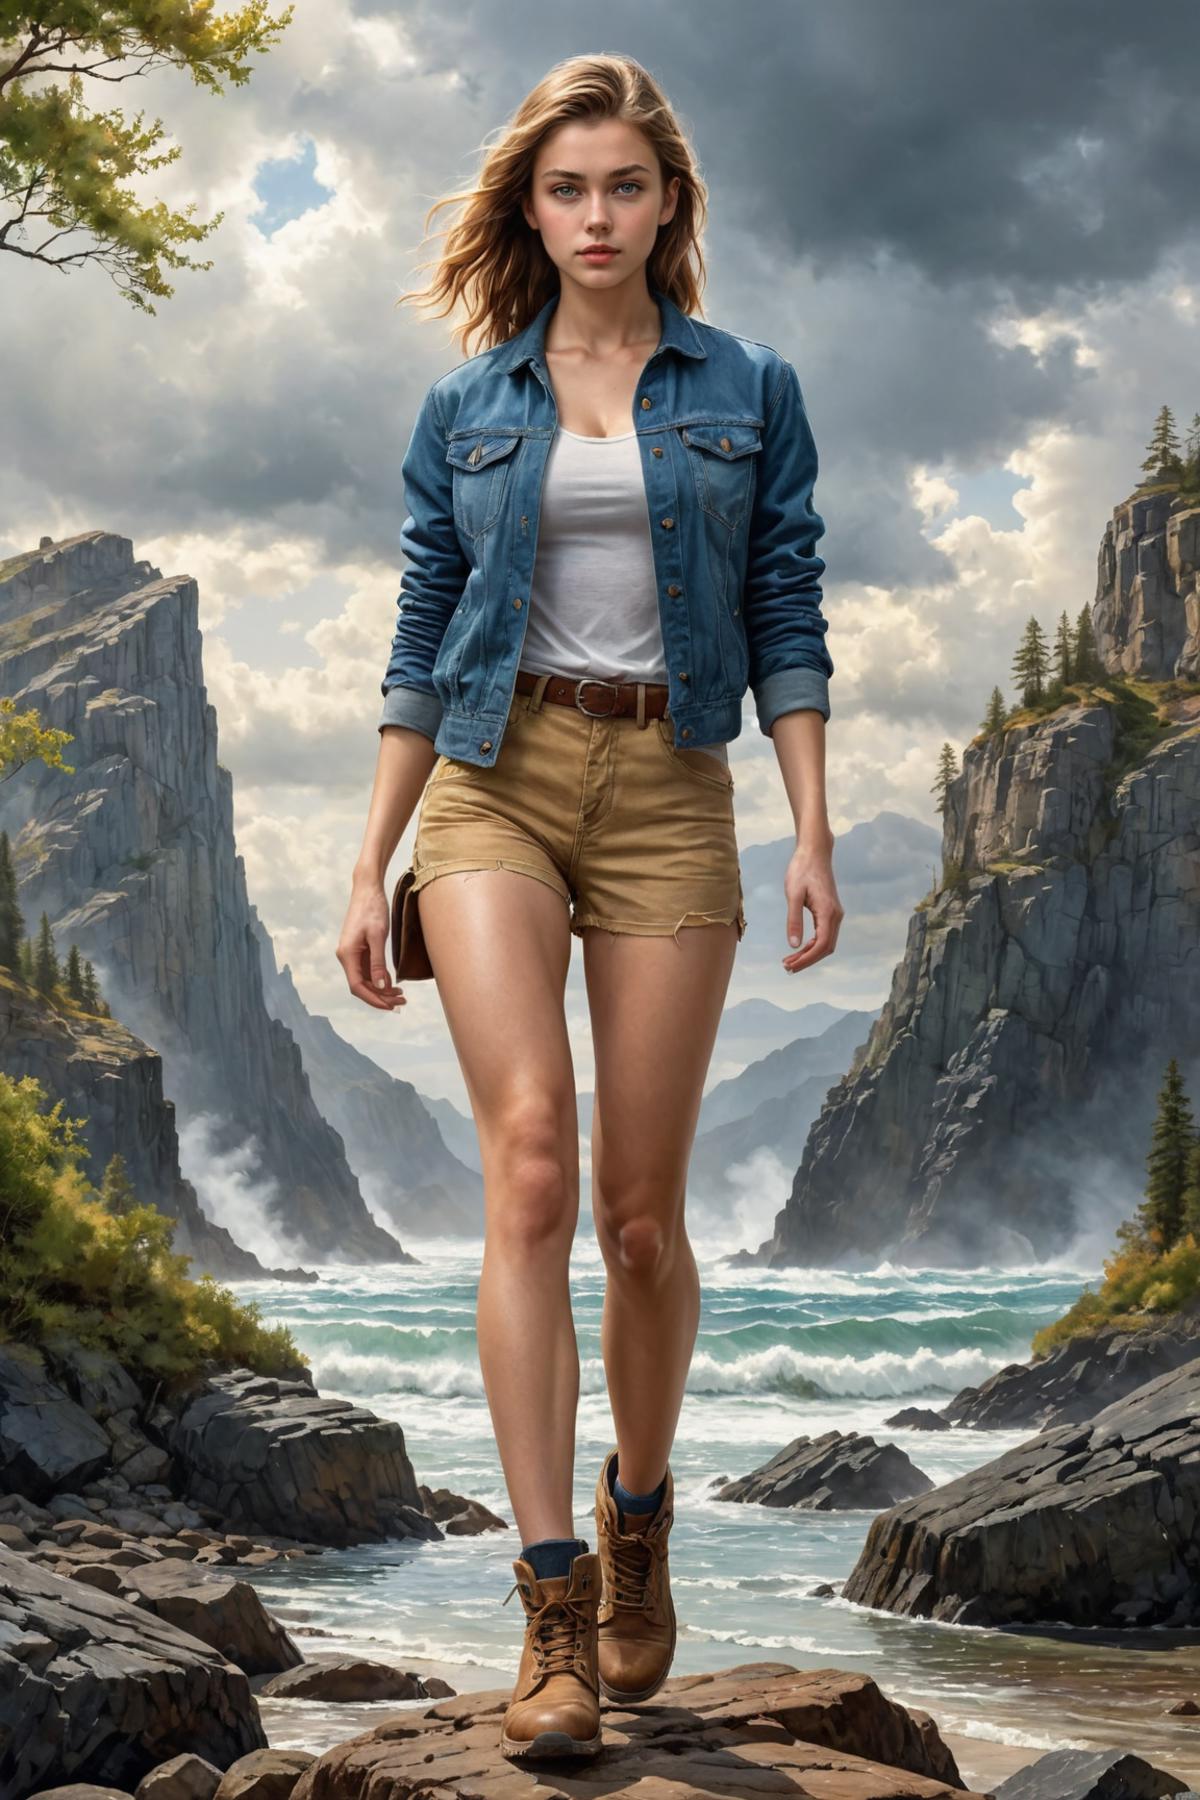 A woman wearing a blue jacket and khaki shorts is walking by the water.